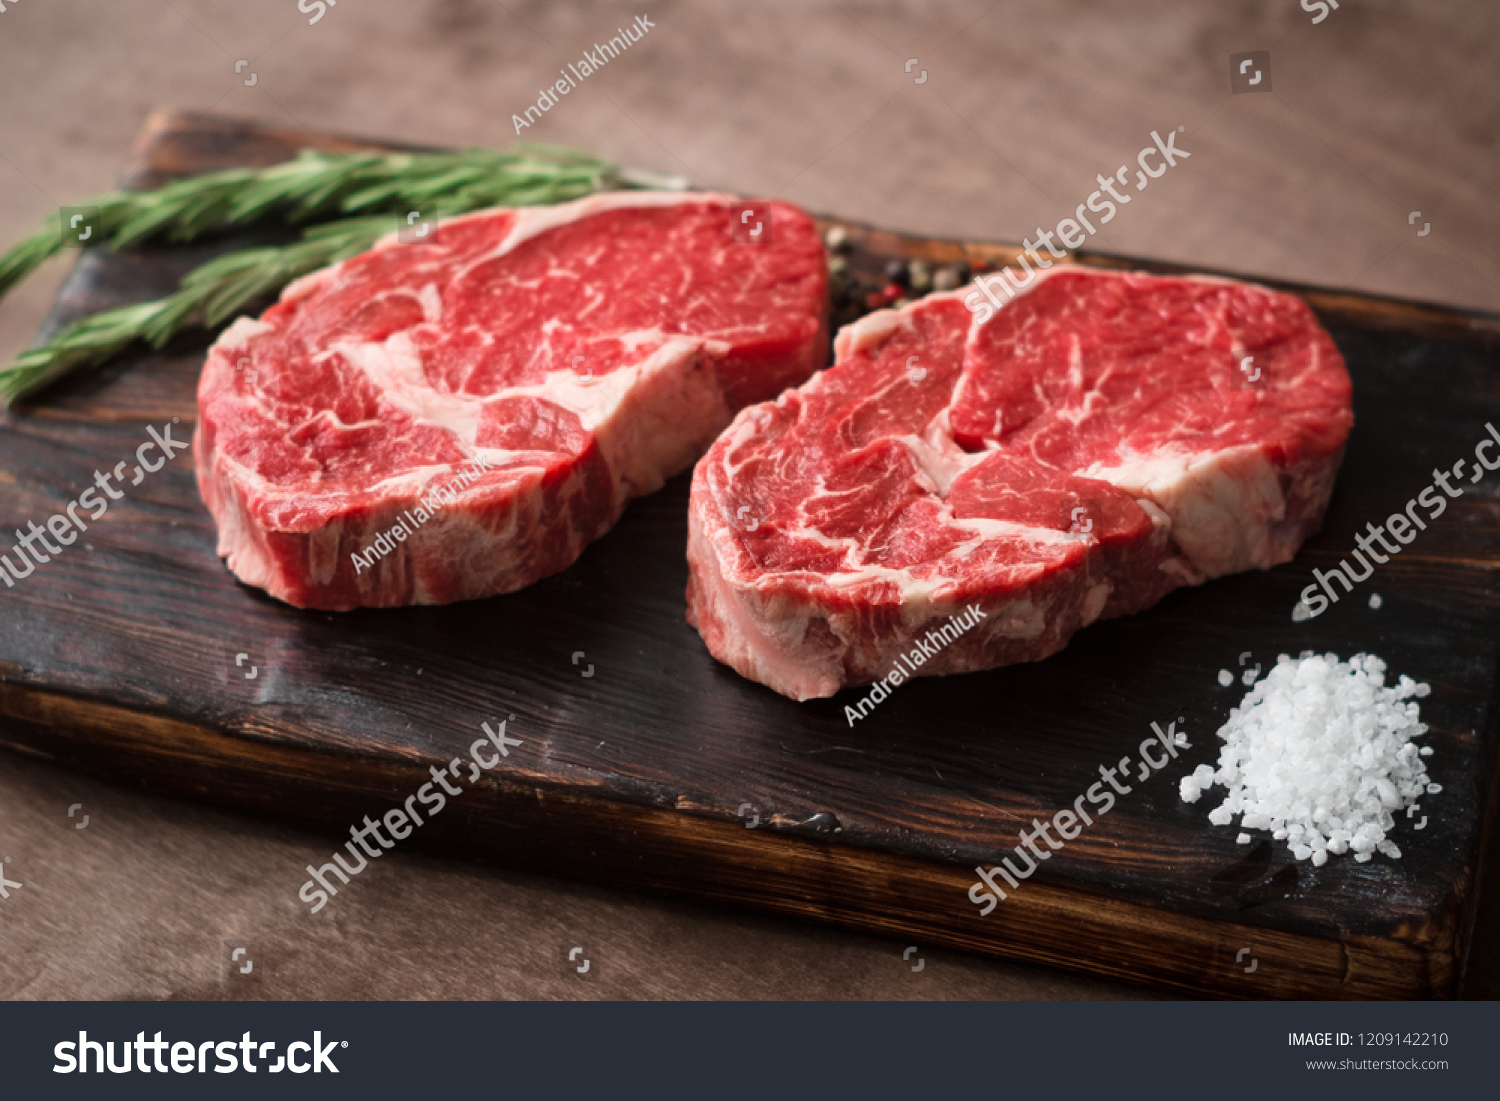 Two fresh raw rib-eye steak on wooden Board on wooden background with salt, pepper and rosmary in a rustic style #1209142210